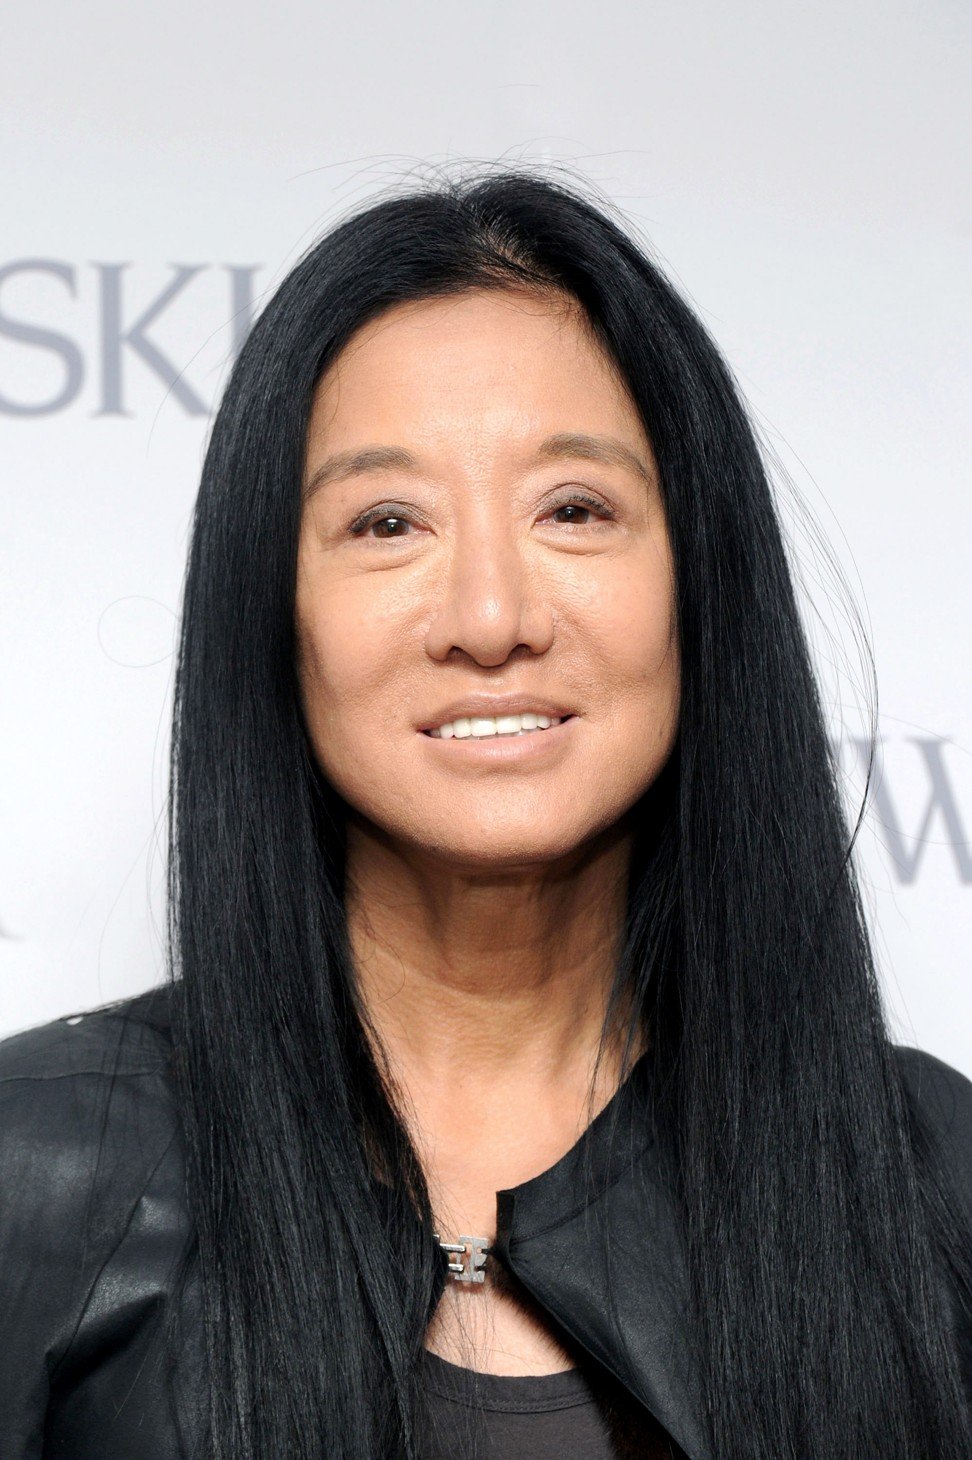 NEW YORK, NY - MARCH 13: Designer Vera Wang attends the CFDA 2013 Awards Nomination event on March 13, 2013 in New York City. Daily Features, Fashion, 01APR2013